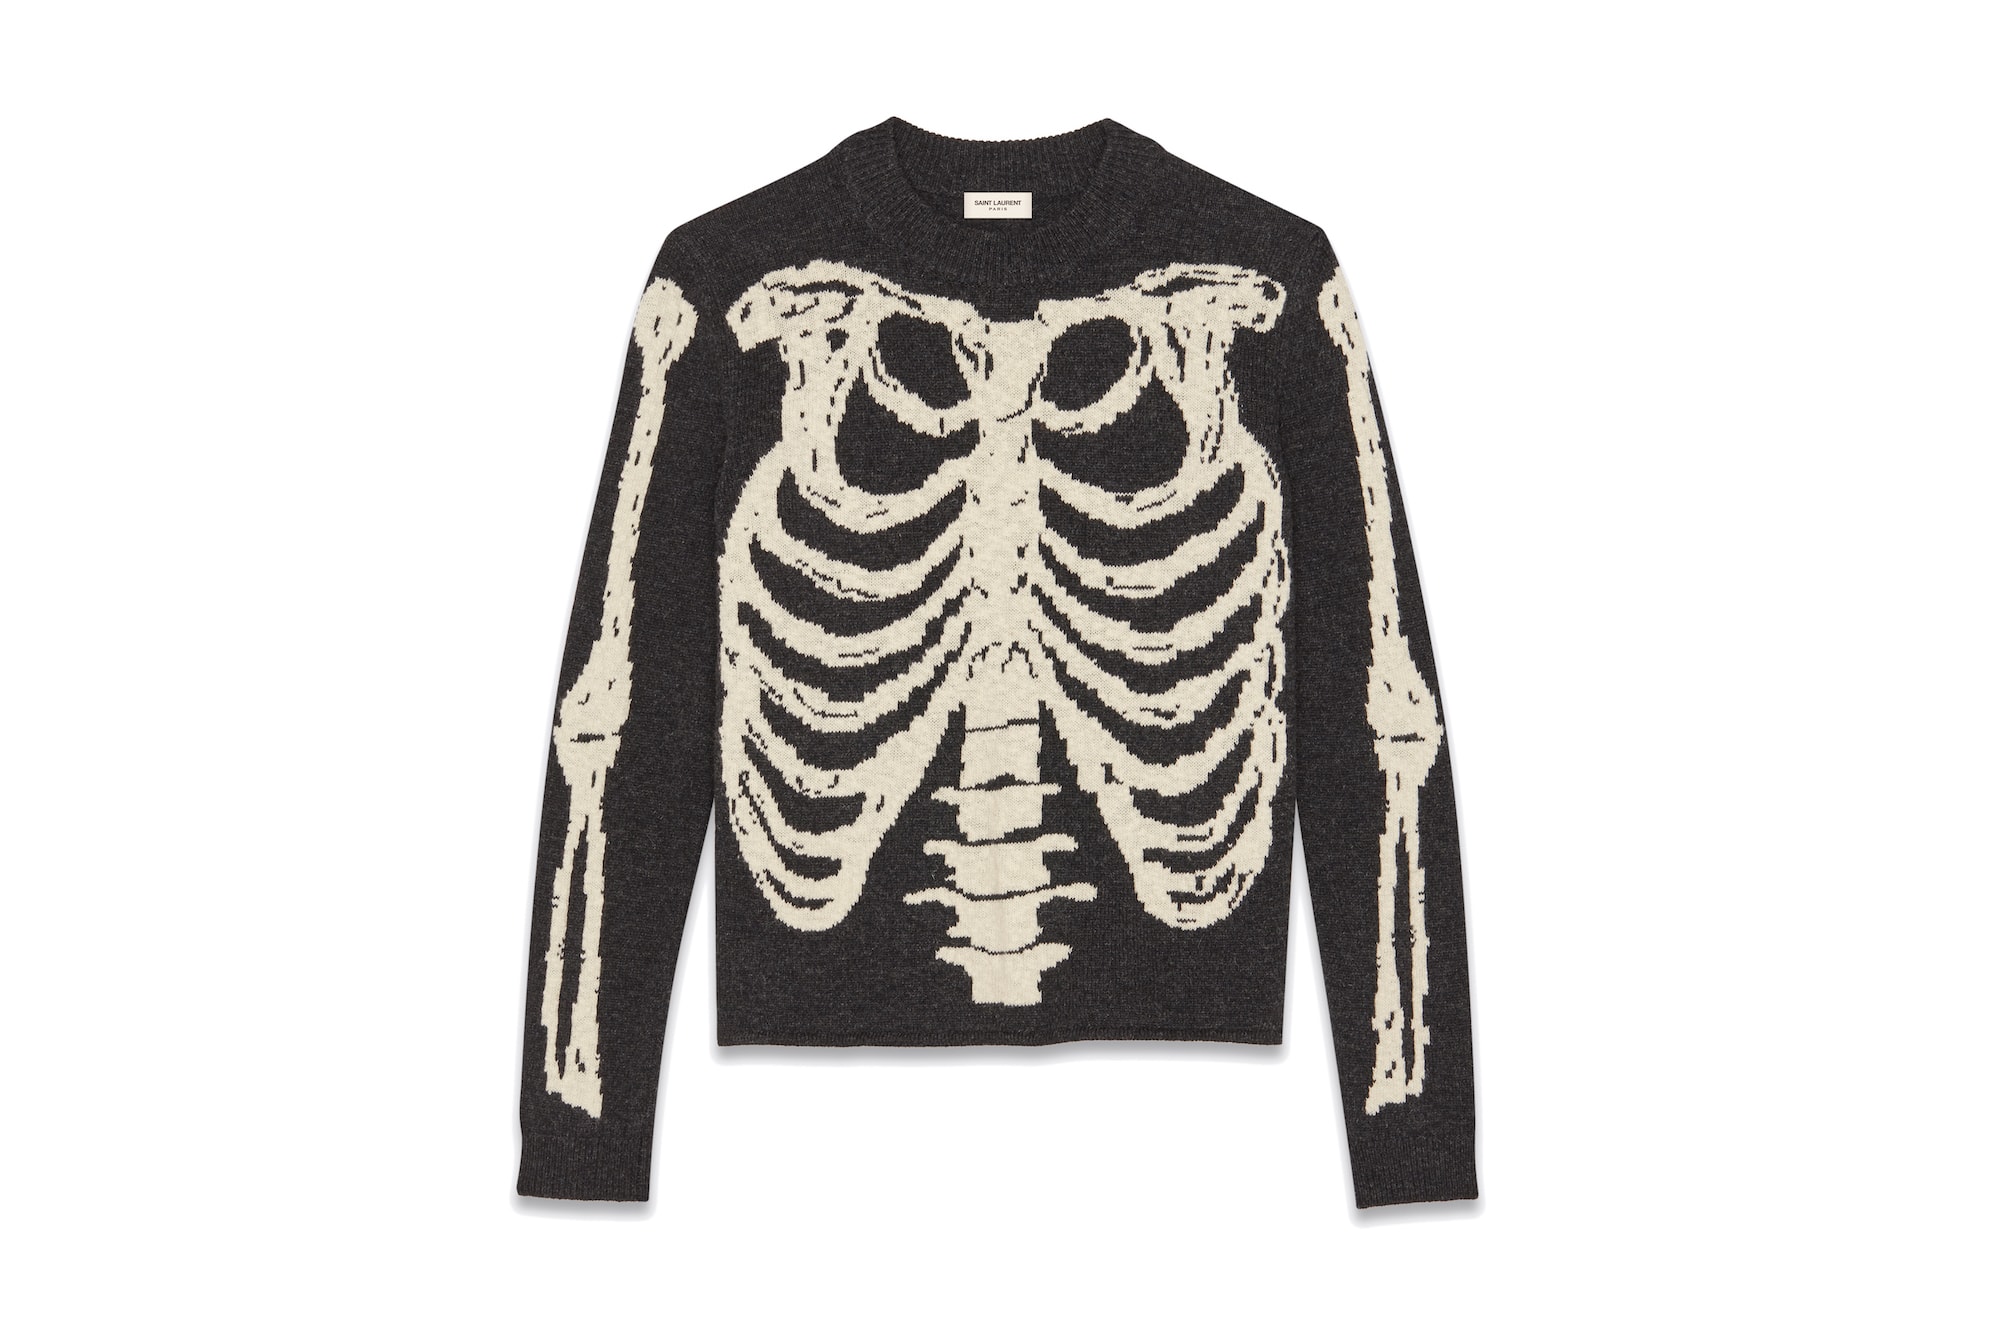 Saint Laurent Halloween Capsule Collection Drop YSL Beauty Candy Anthony Vaccarello Spooky Season Accessories Lighter Skeleton Knit Sweater